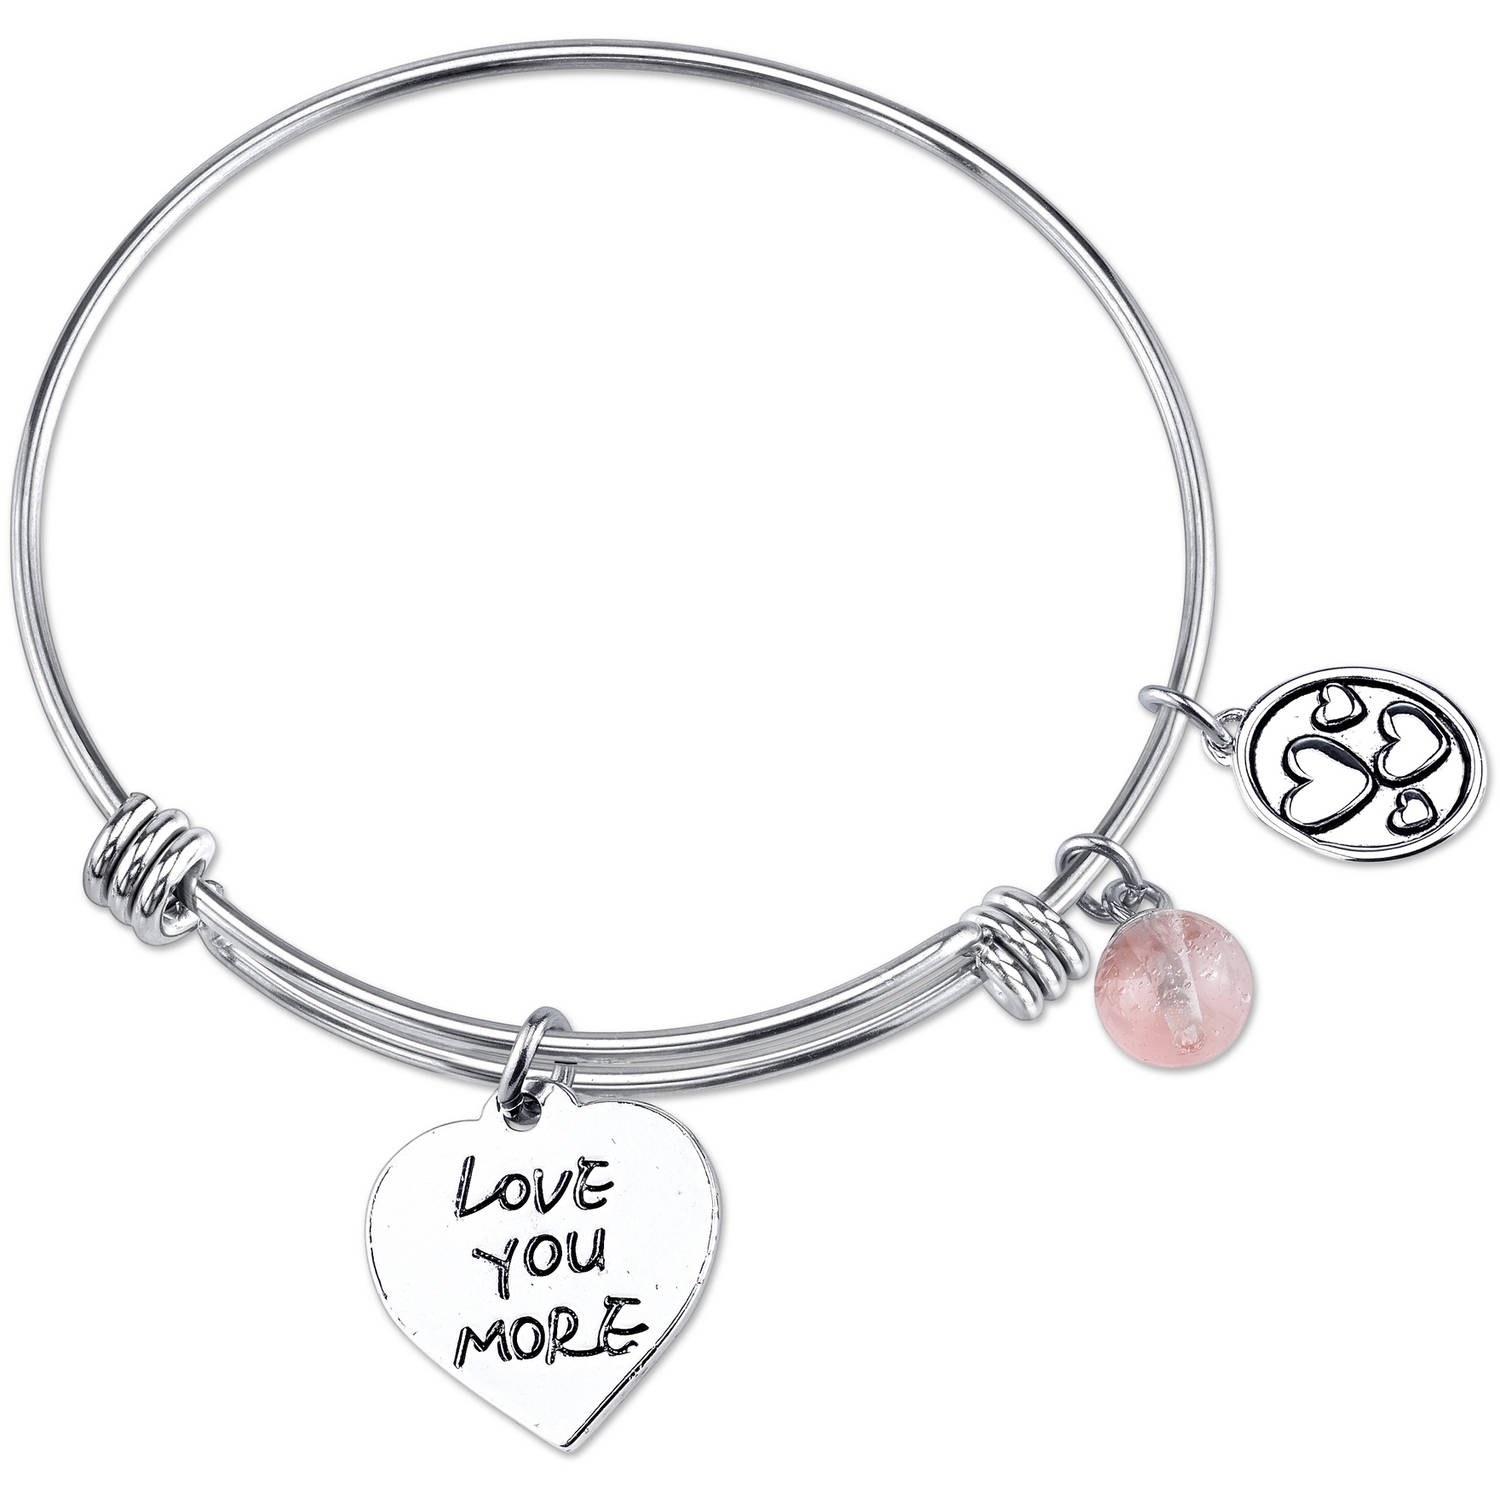 Little Luxuries 8mm Cherry Quartz and Crystal Stainless Steel "I Love You More" Heart Bead Bangle Bracelet, 8" - image 2 of 2